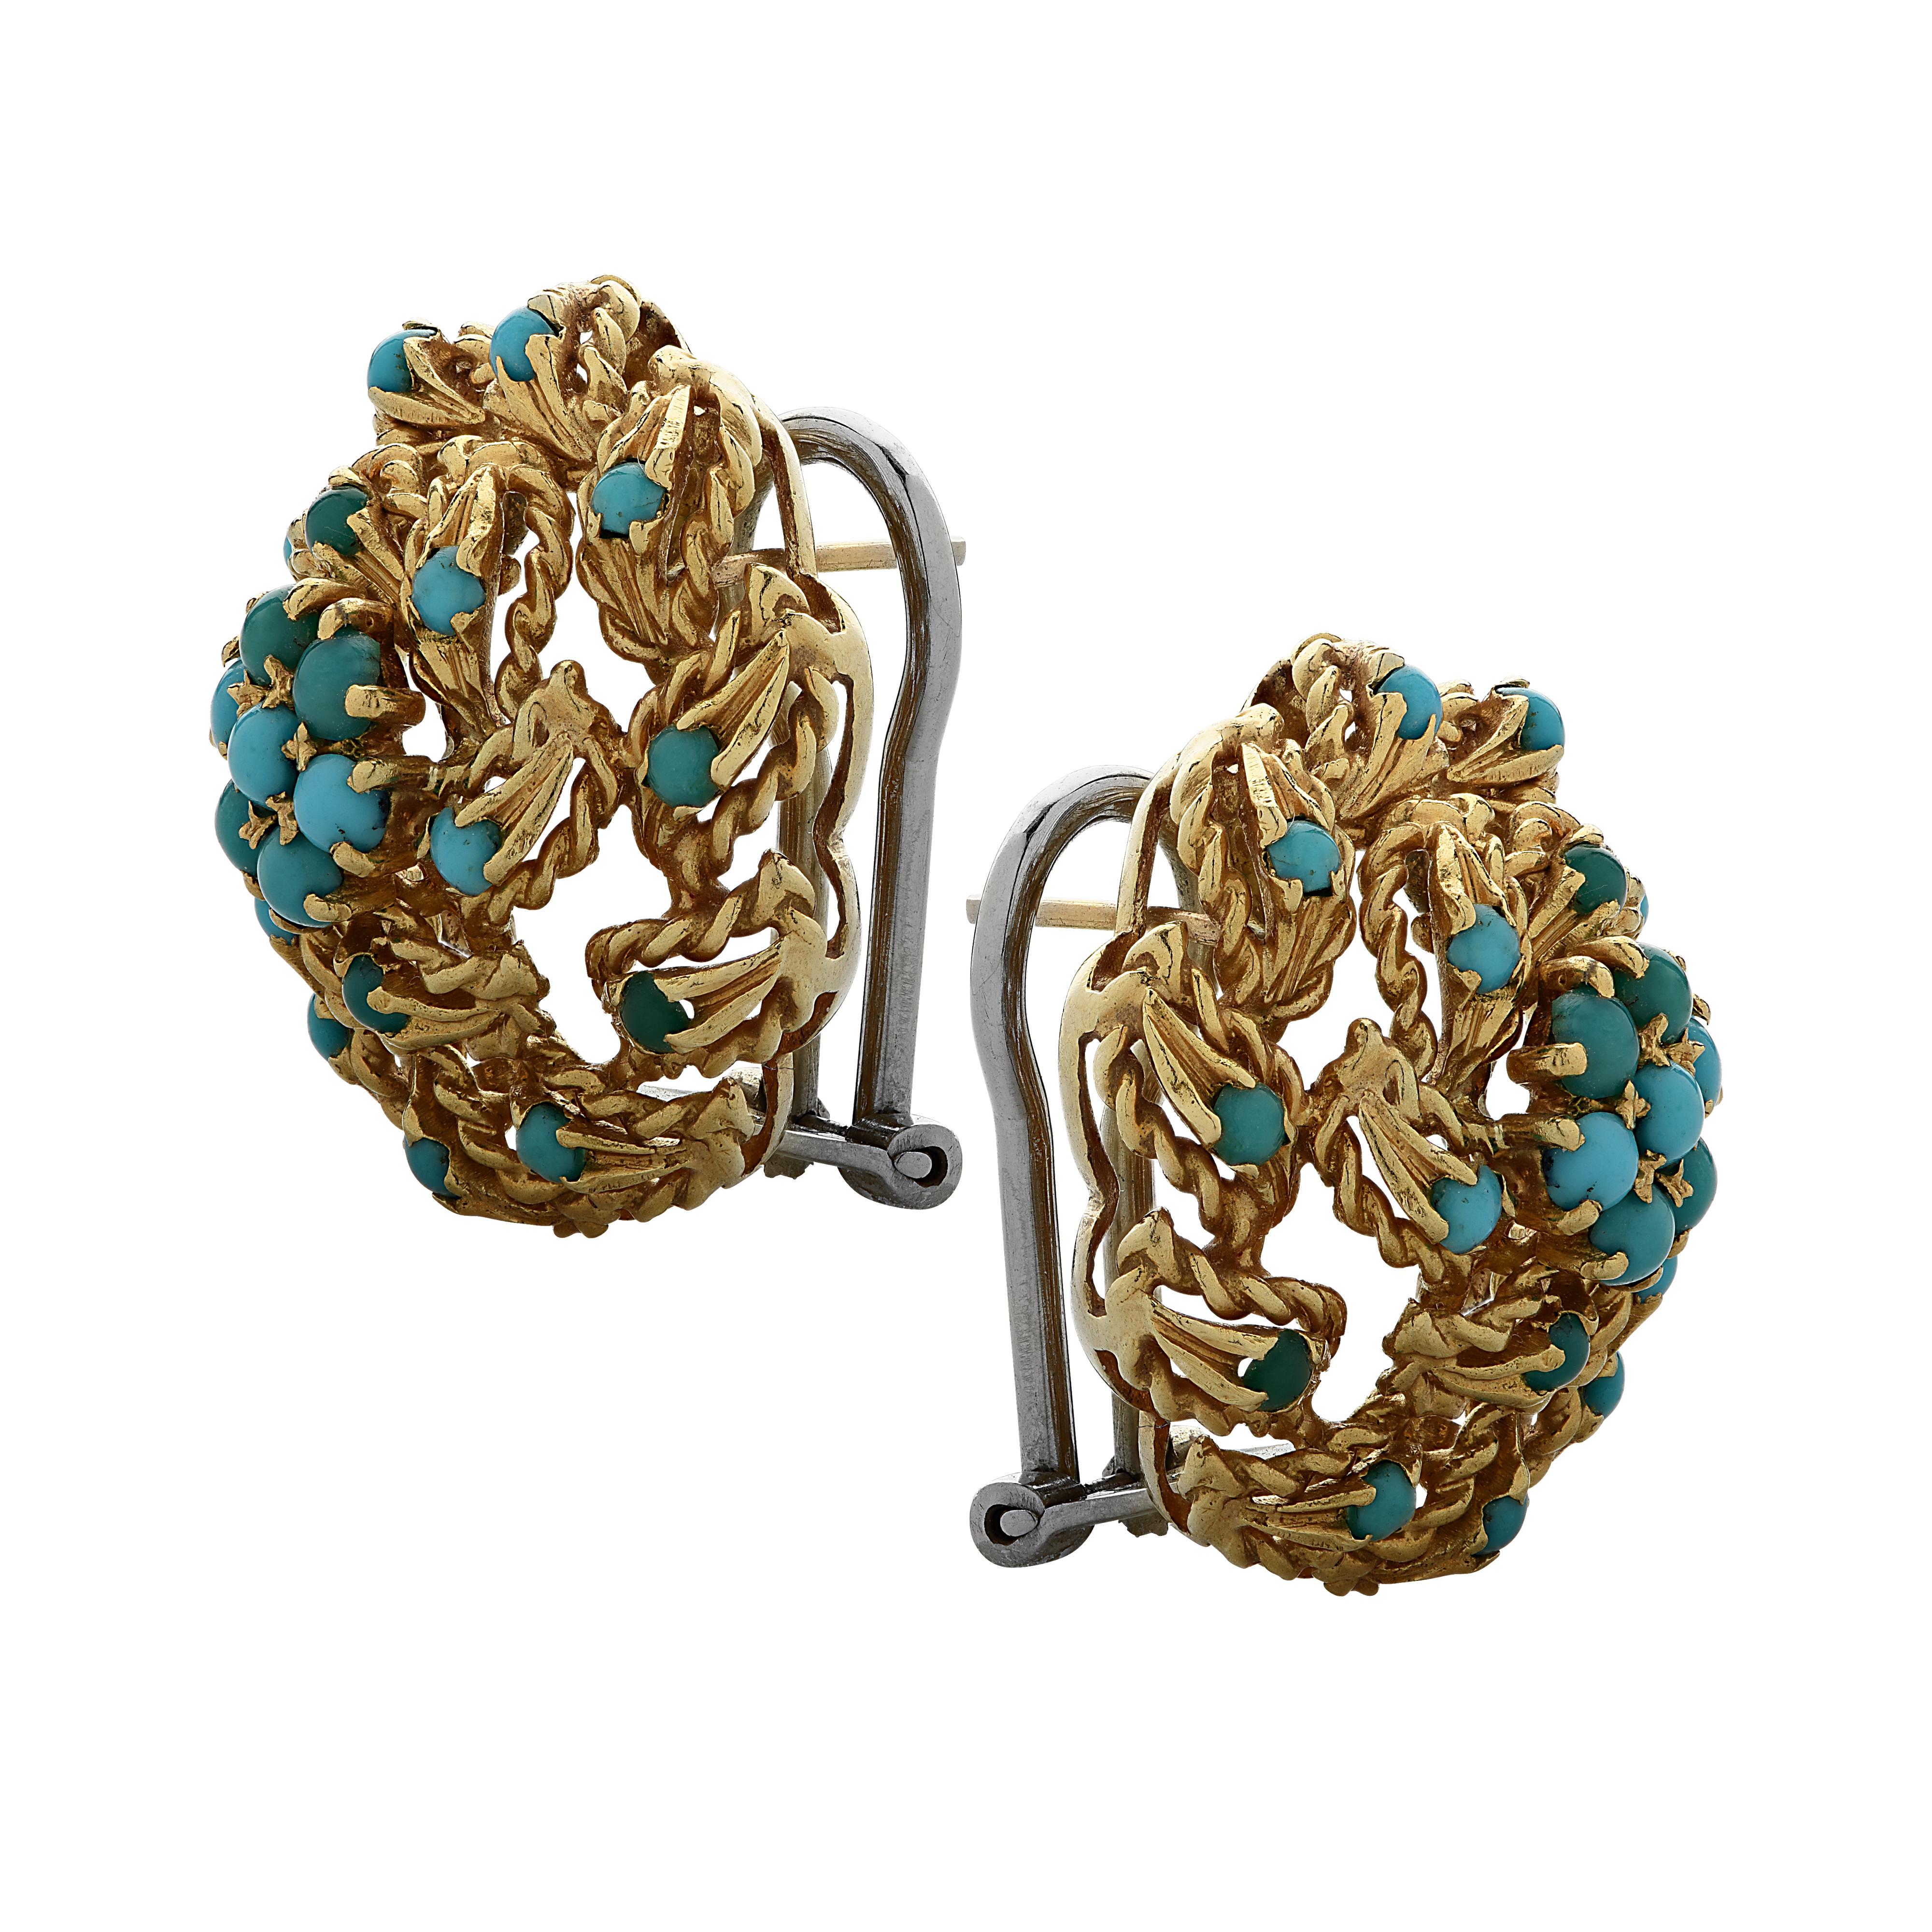 Beautiful stud earrings crafted in 18 karat yellow gold with turquoise cabochons. Turquoise cabochons arranged in a flower rest in the center of twisted gold leaves clustered together, swirling outwards, with turquoise cabochons sprinkled on the